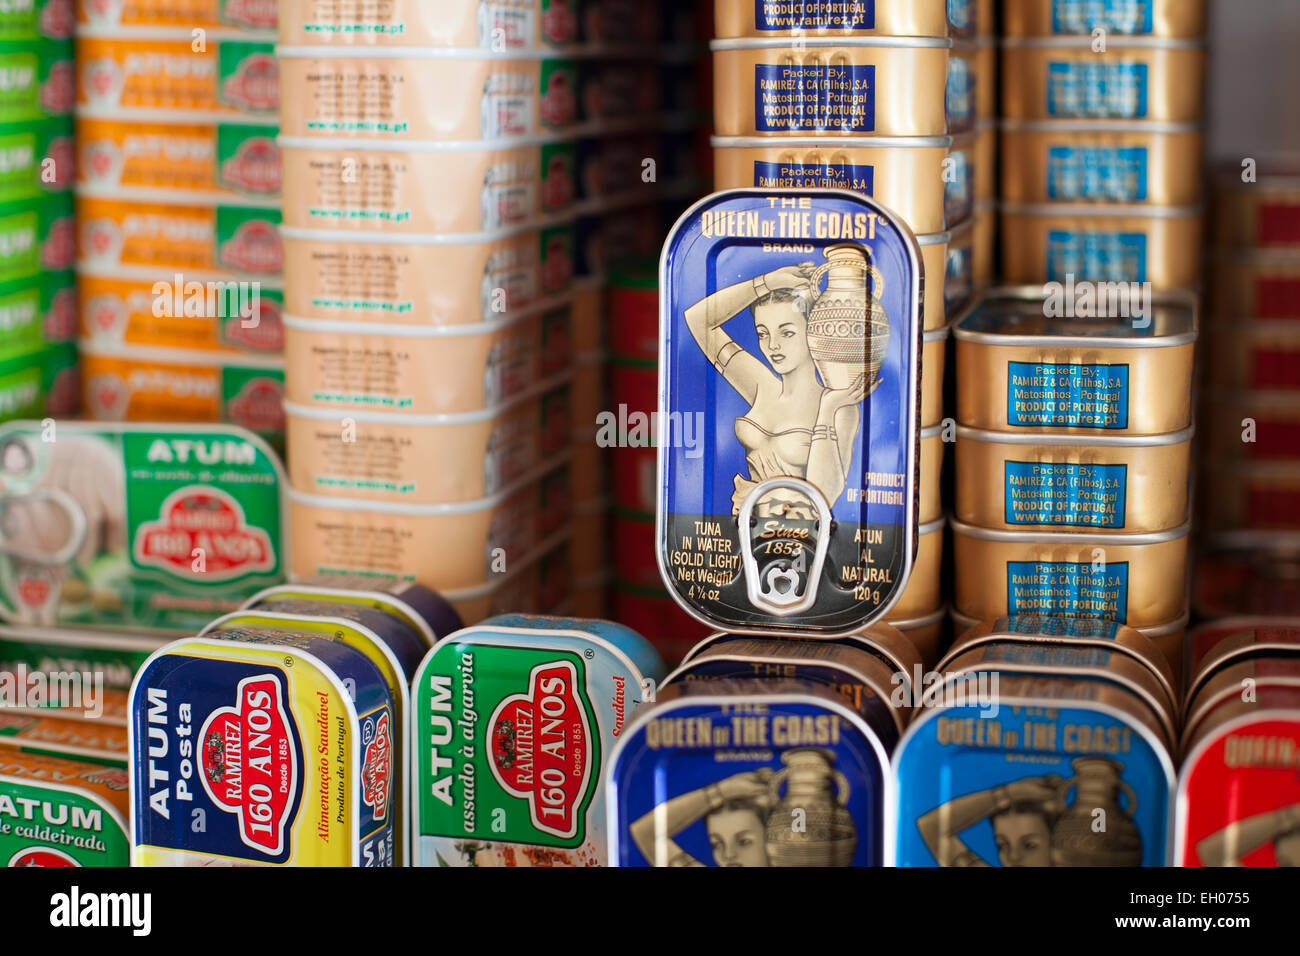 SHOP ' A LOJA DAS CONSERVAS ' WITH TINNED FISH AT DOWNTOWN LISBON, PORTUGAL. Stock Photo